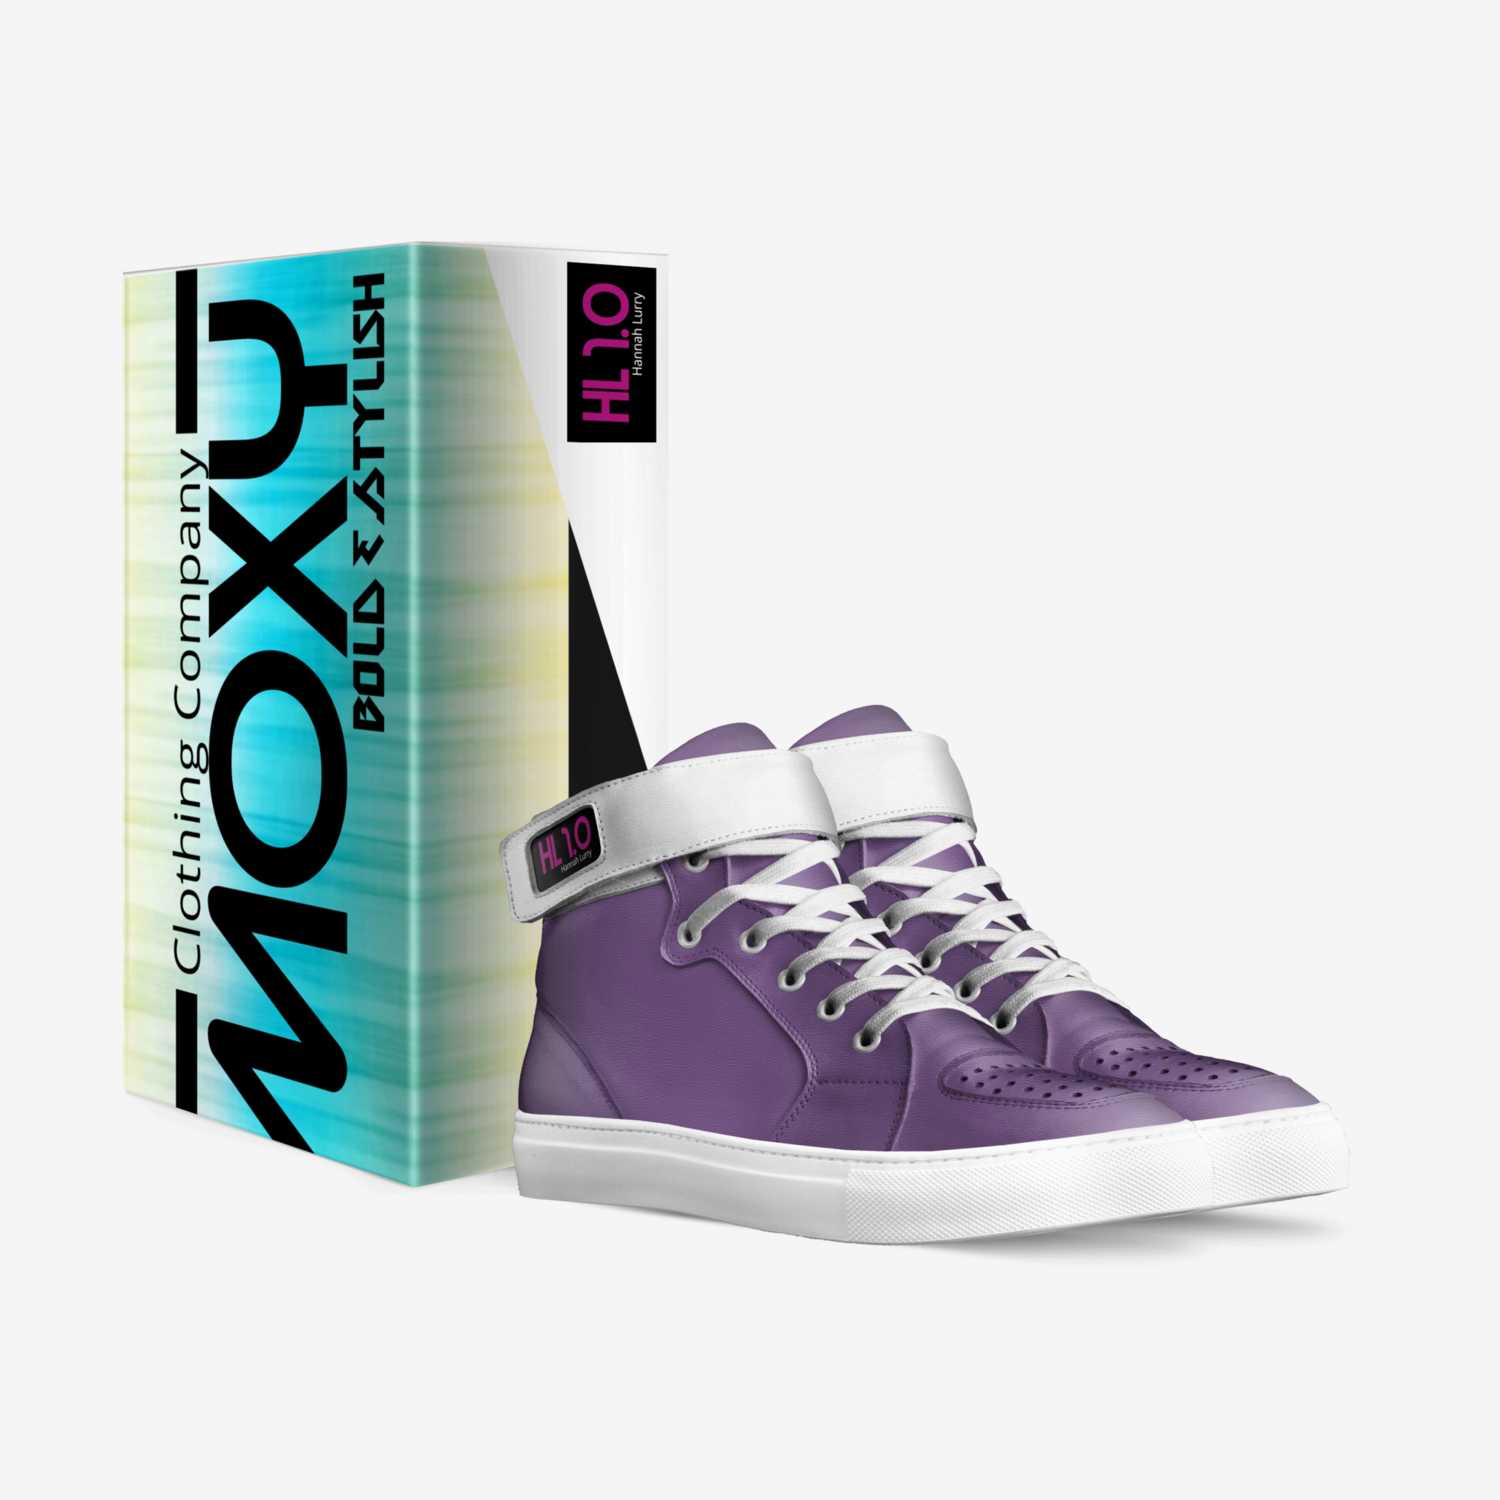 HL 2.0 custom made in Italy shoes by Moxy Clothing Co. | Box view